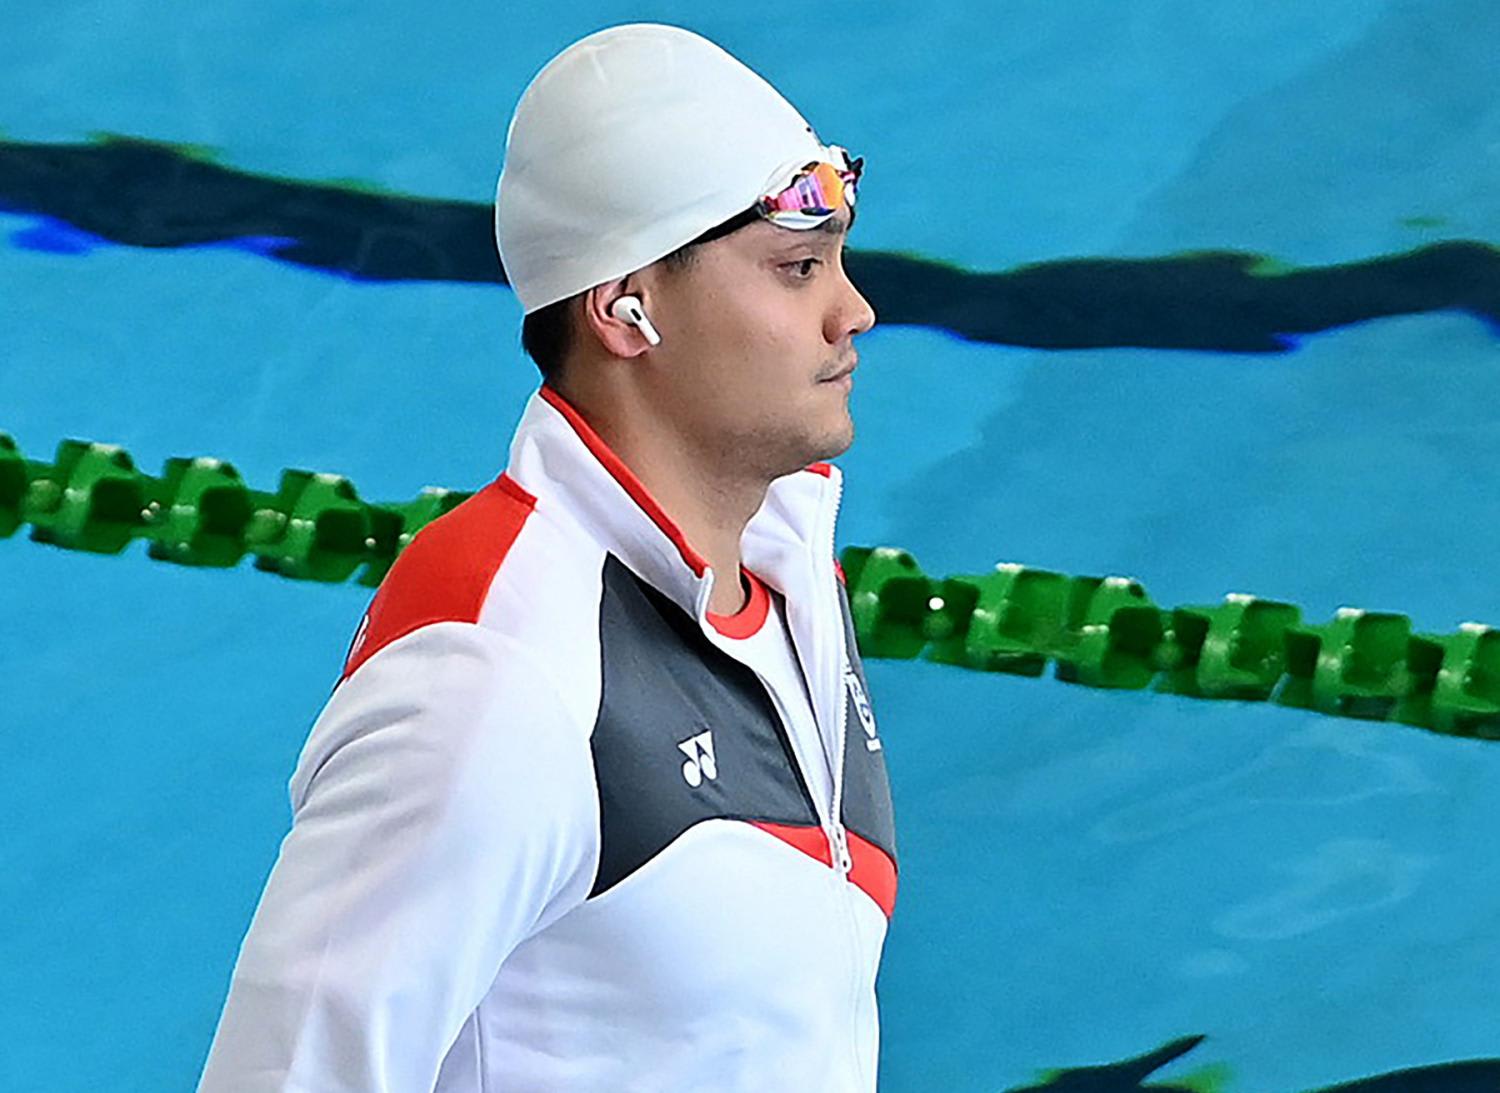 Singapore's Joseph Schooling pictured before his swimming heat during the 31st Southeast Asian Games (SEA Games) in Hanoi, Vietnam on May 16, 2022.